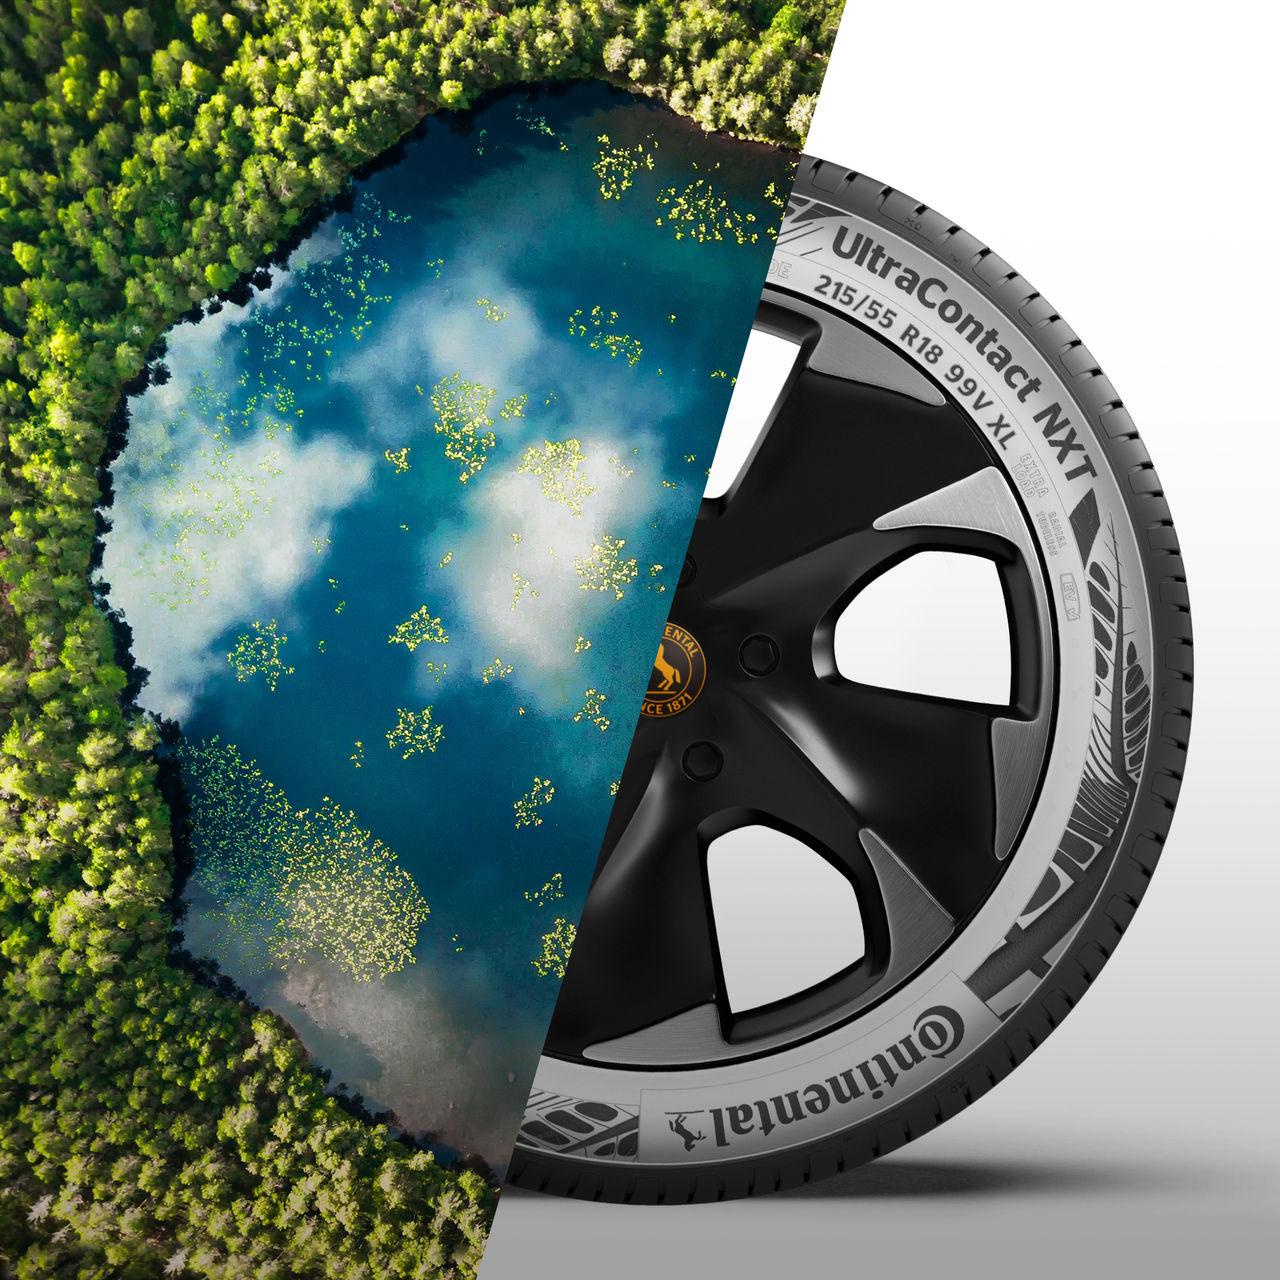 Continental UötraContact NXT tire made out of 65% sustainable materials 